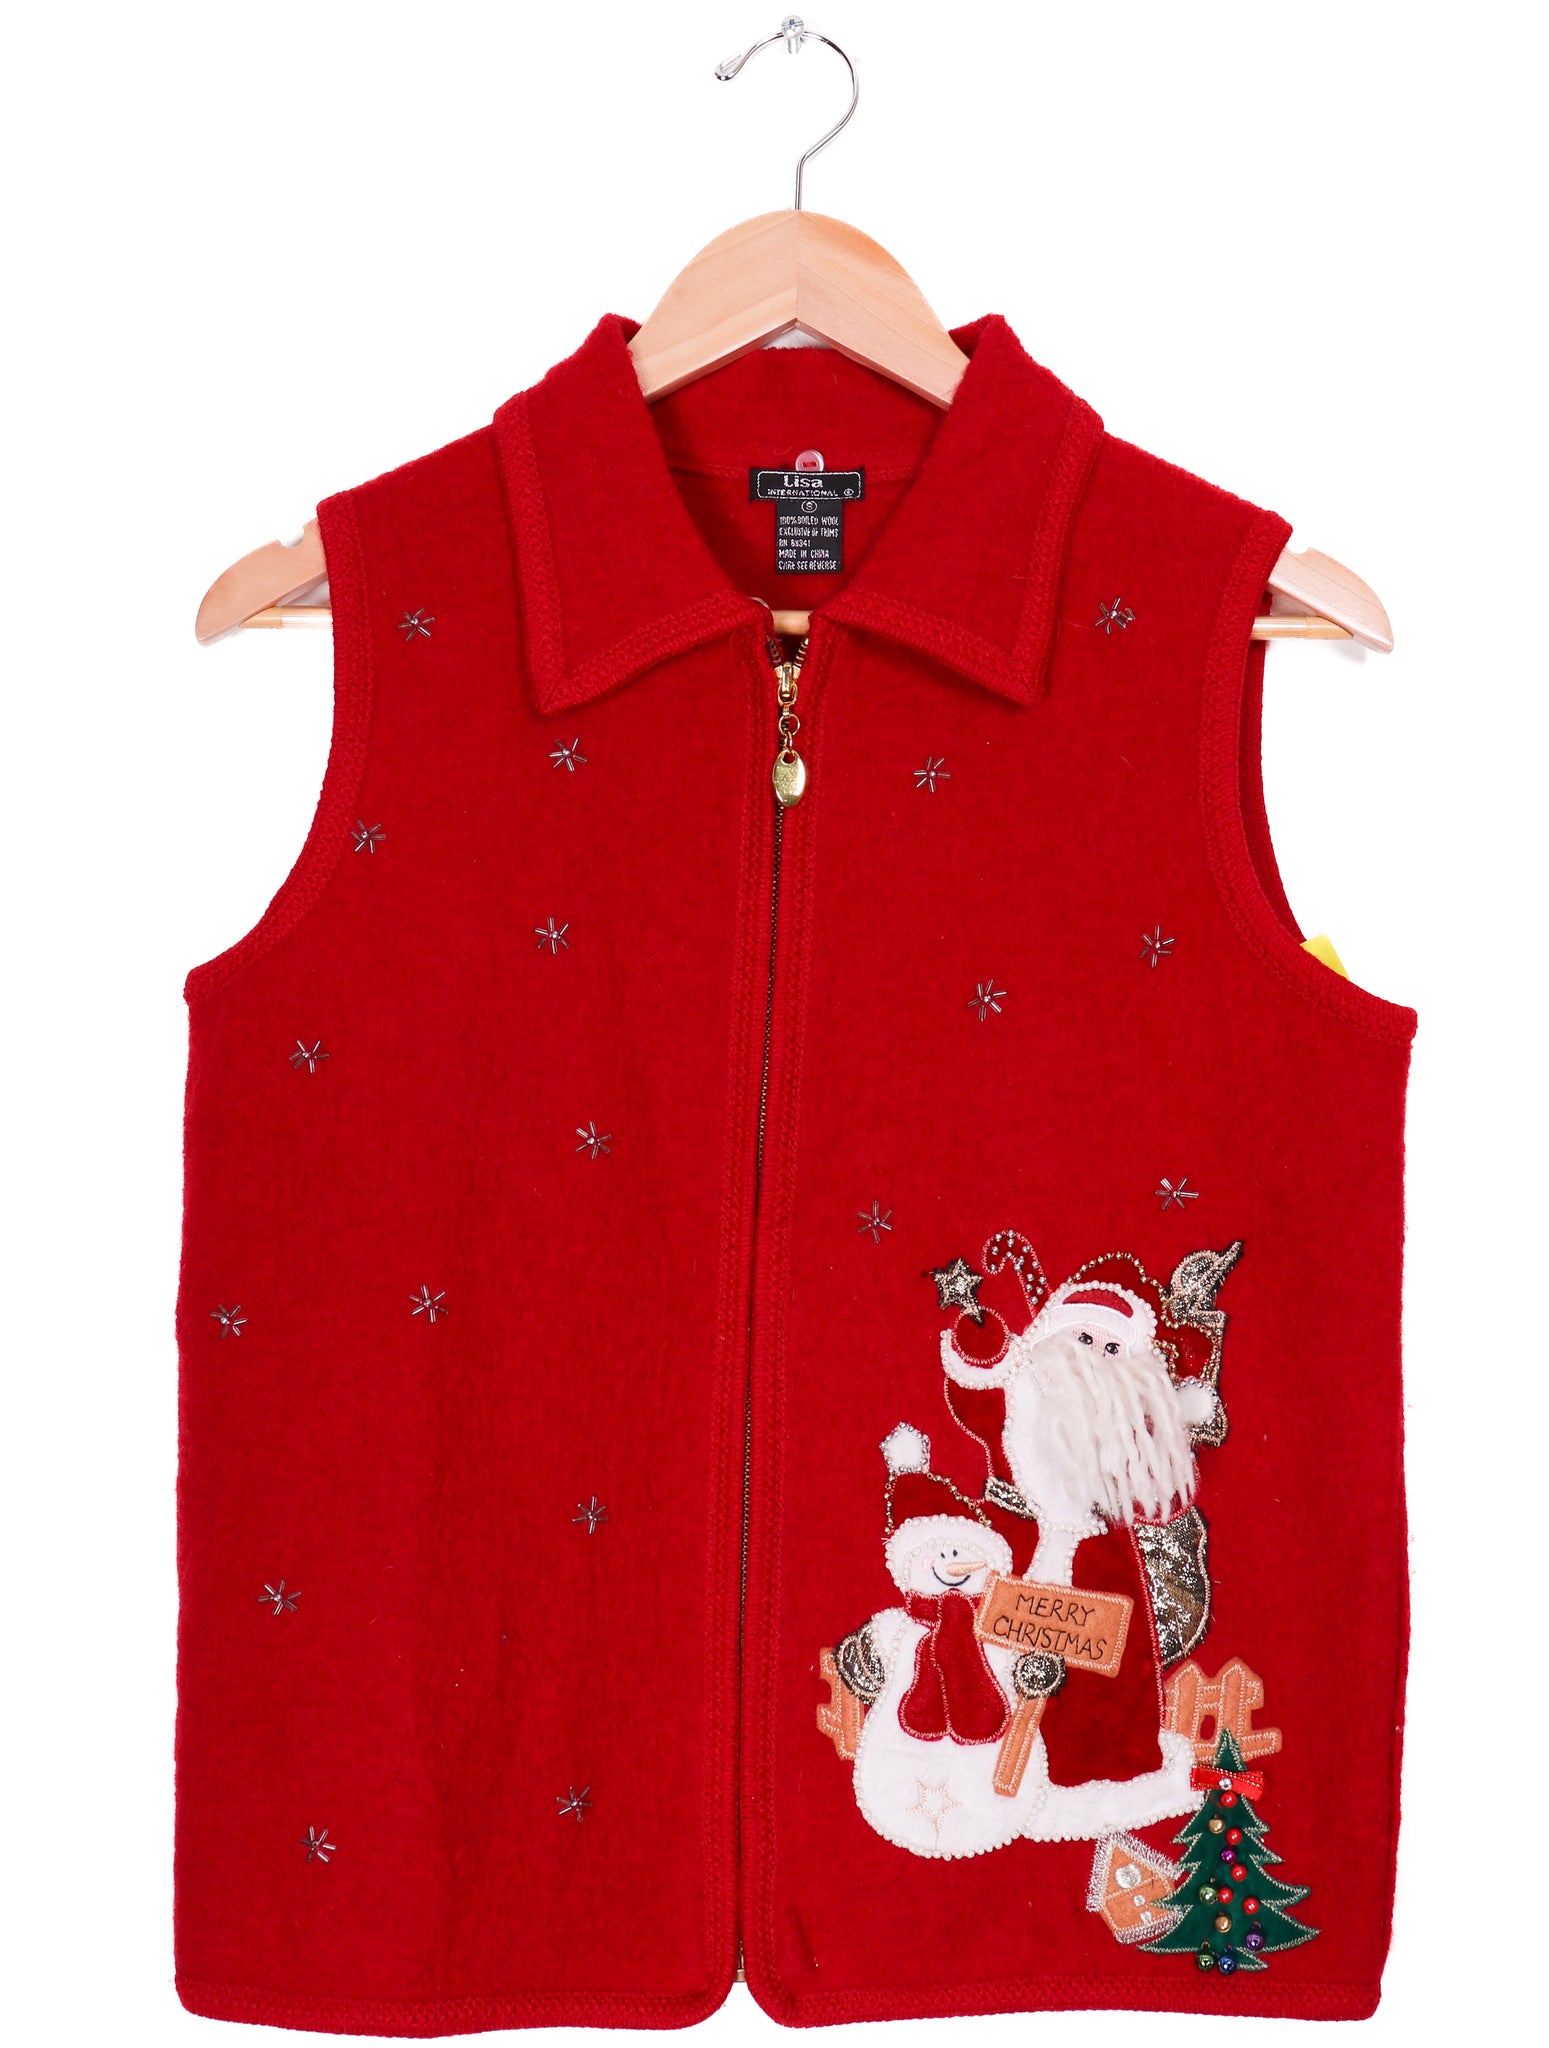 Lisa International "Merry Christmas" from Frosty and Santa Vest